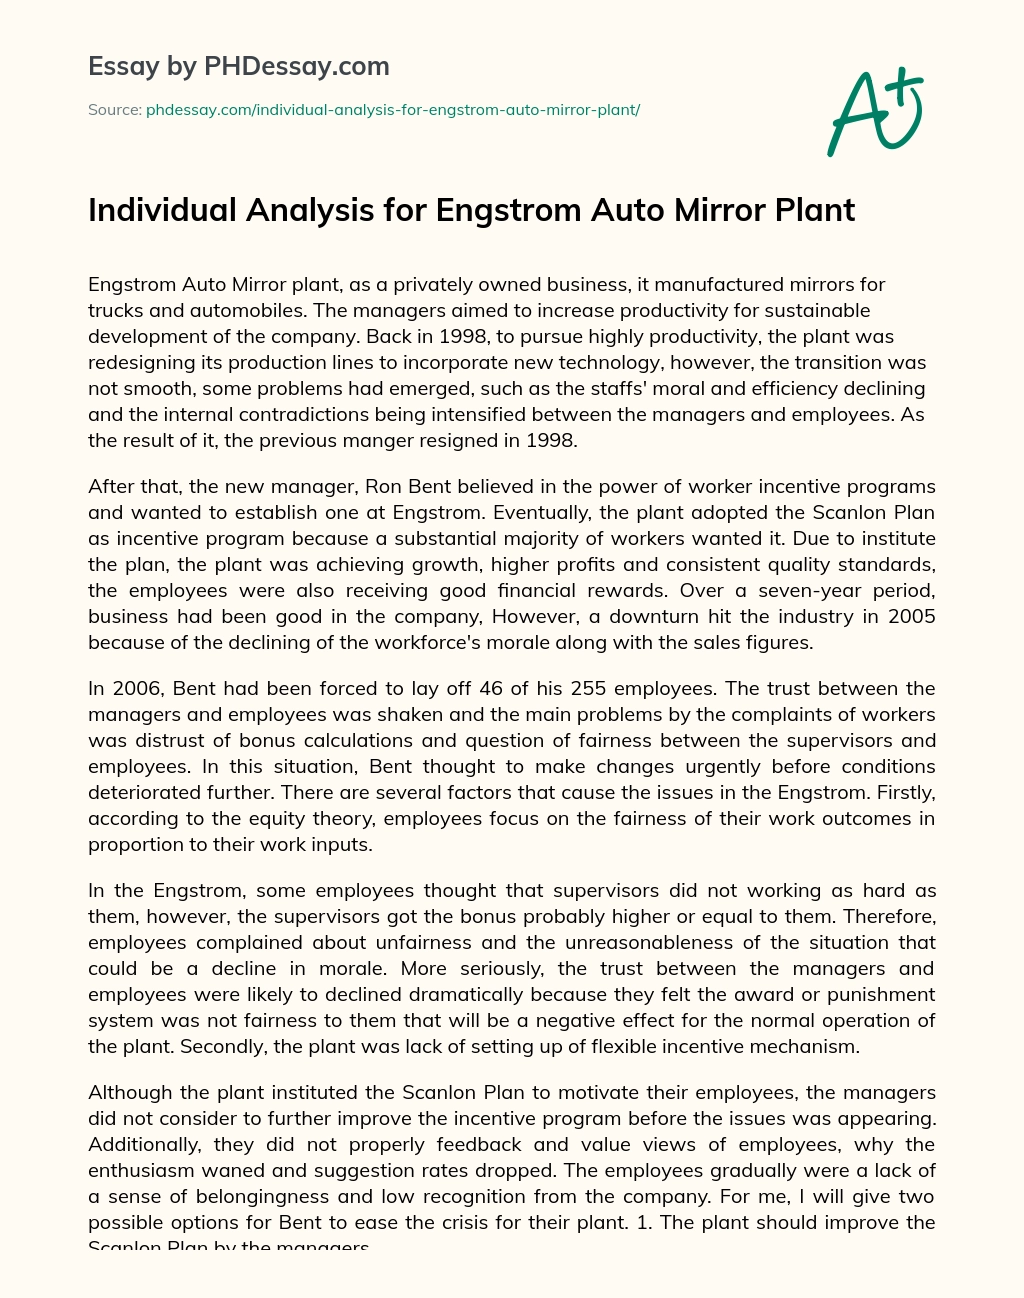 Individual Analysis for Engstrom Auto Mirror Plant essay